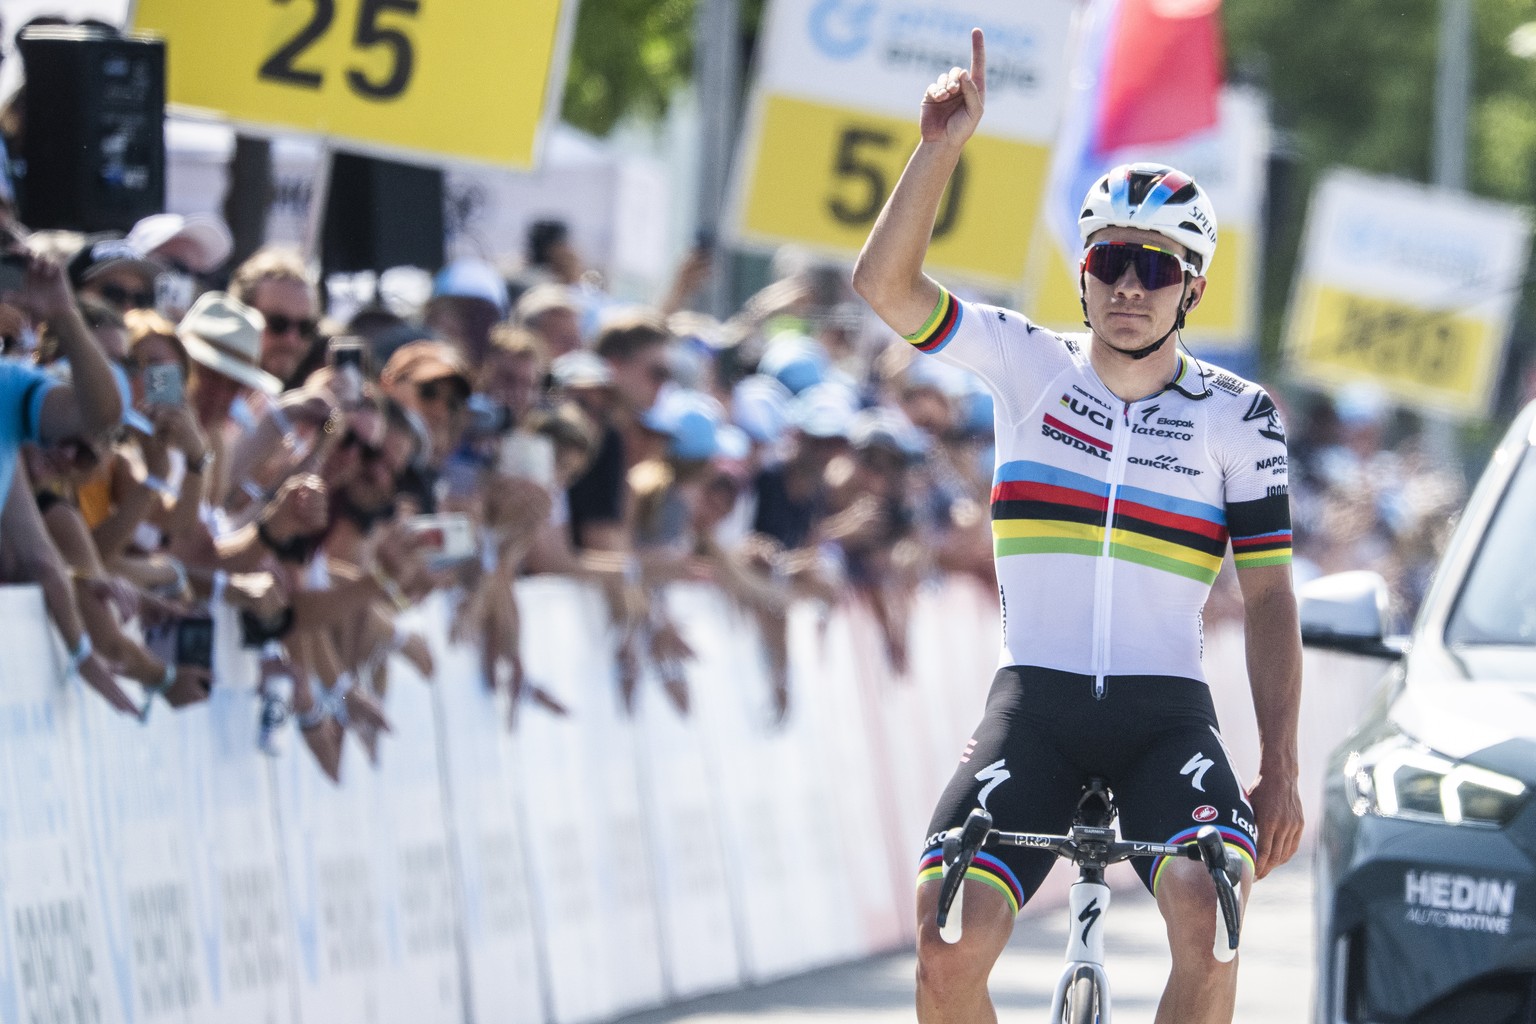 Remco Evenepoel from Belgium of Soudal-Quick Step celebrates after winning in commemoration of Gino Maeder of Switzerland who passed away yesterday after crashing, during the seventh stage, a 174 km r ...